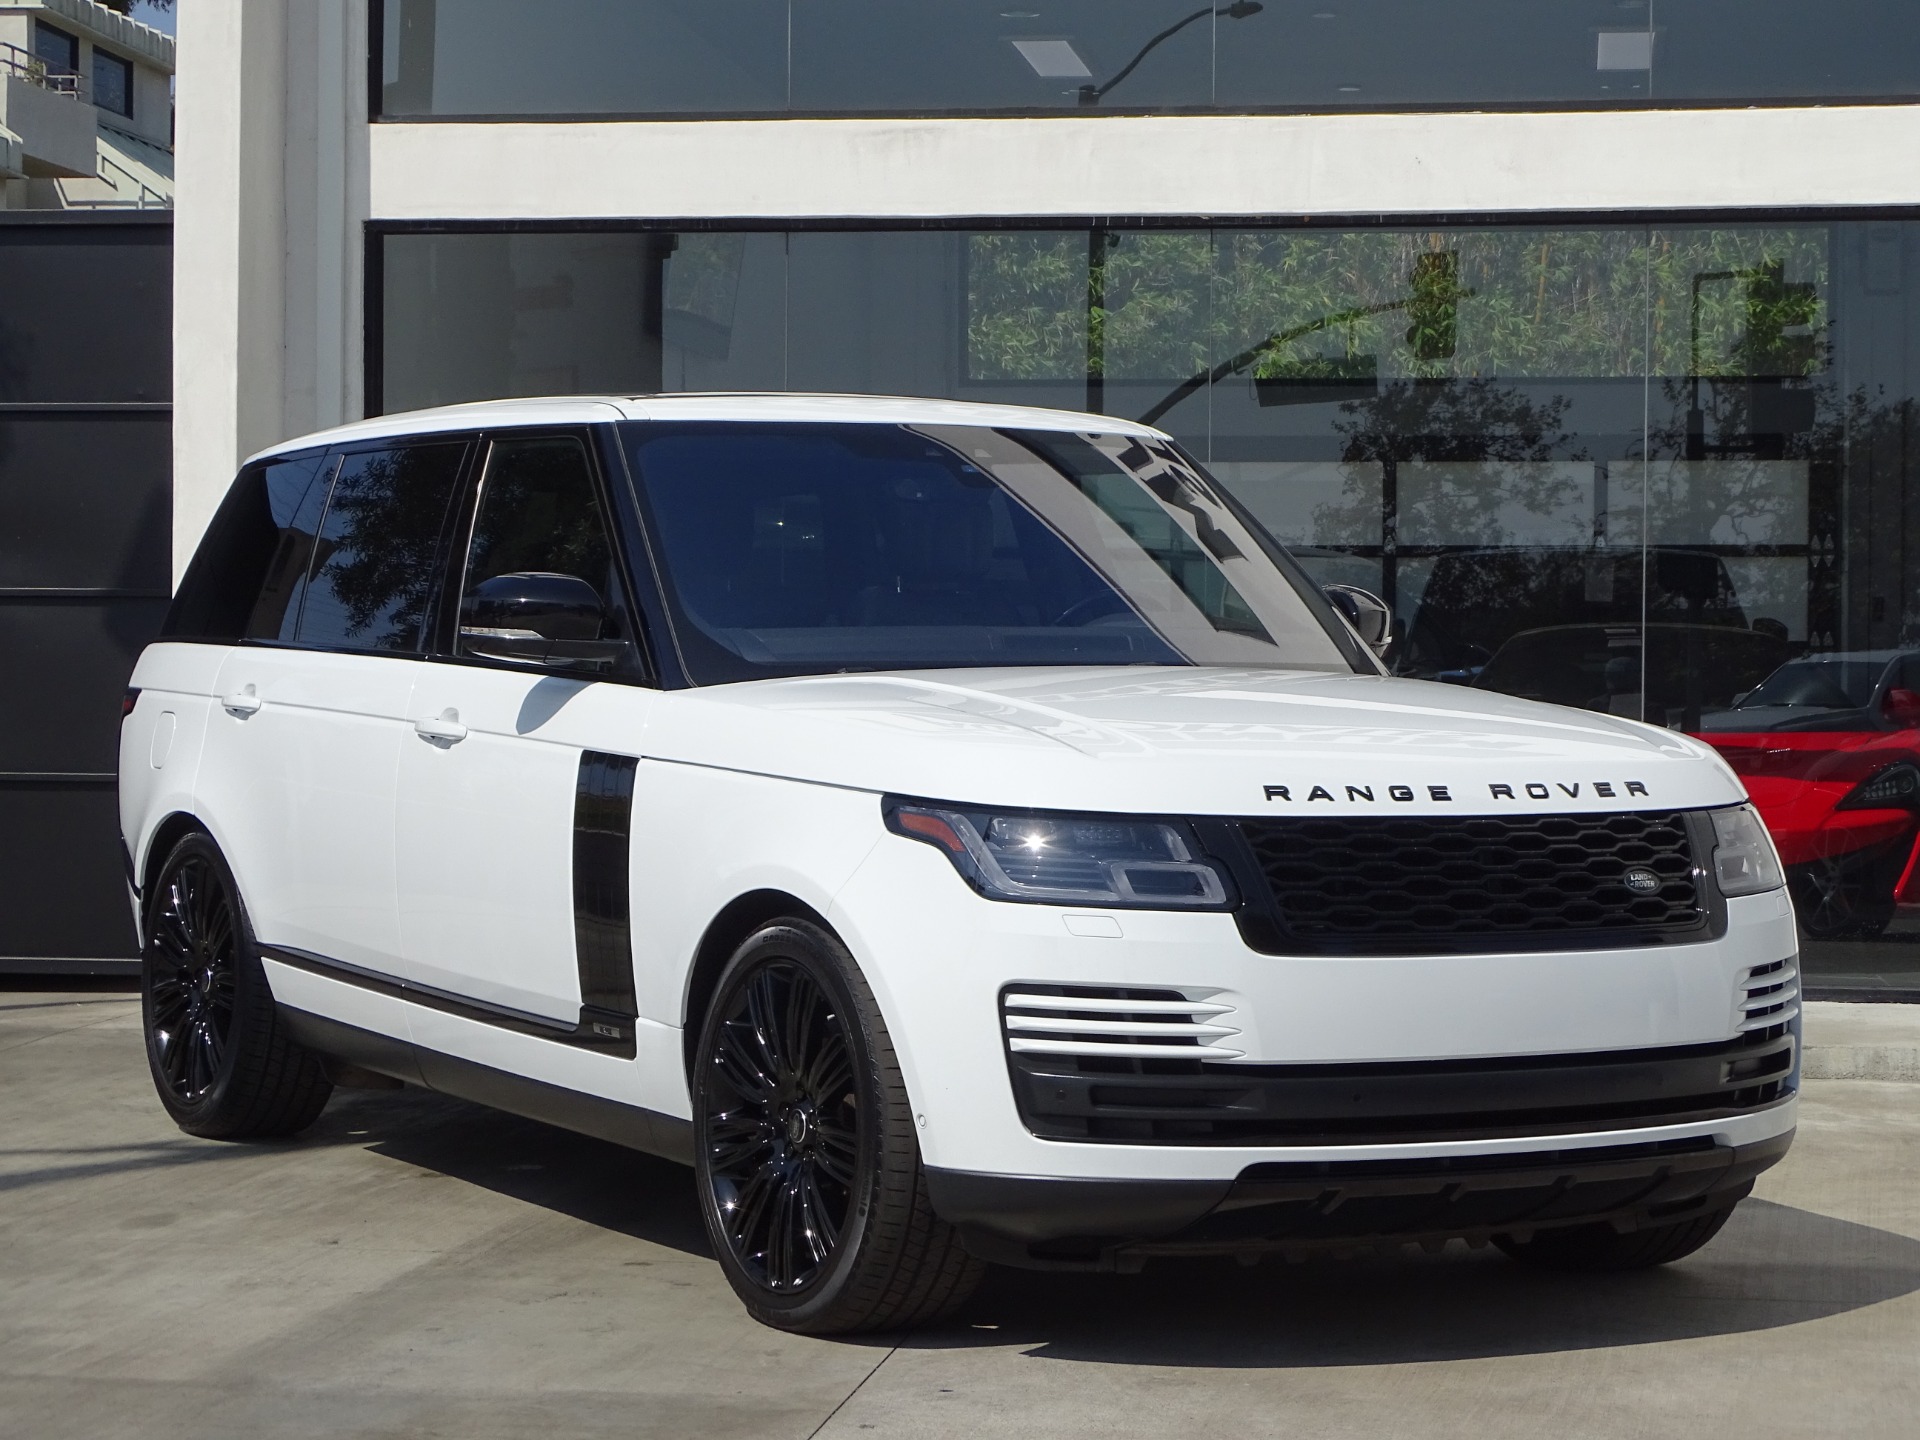 2018 Land Rover Range Rover Supercharged LWB Stock 7079 for sale near Redondo Beach, CA CA